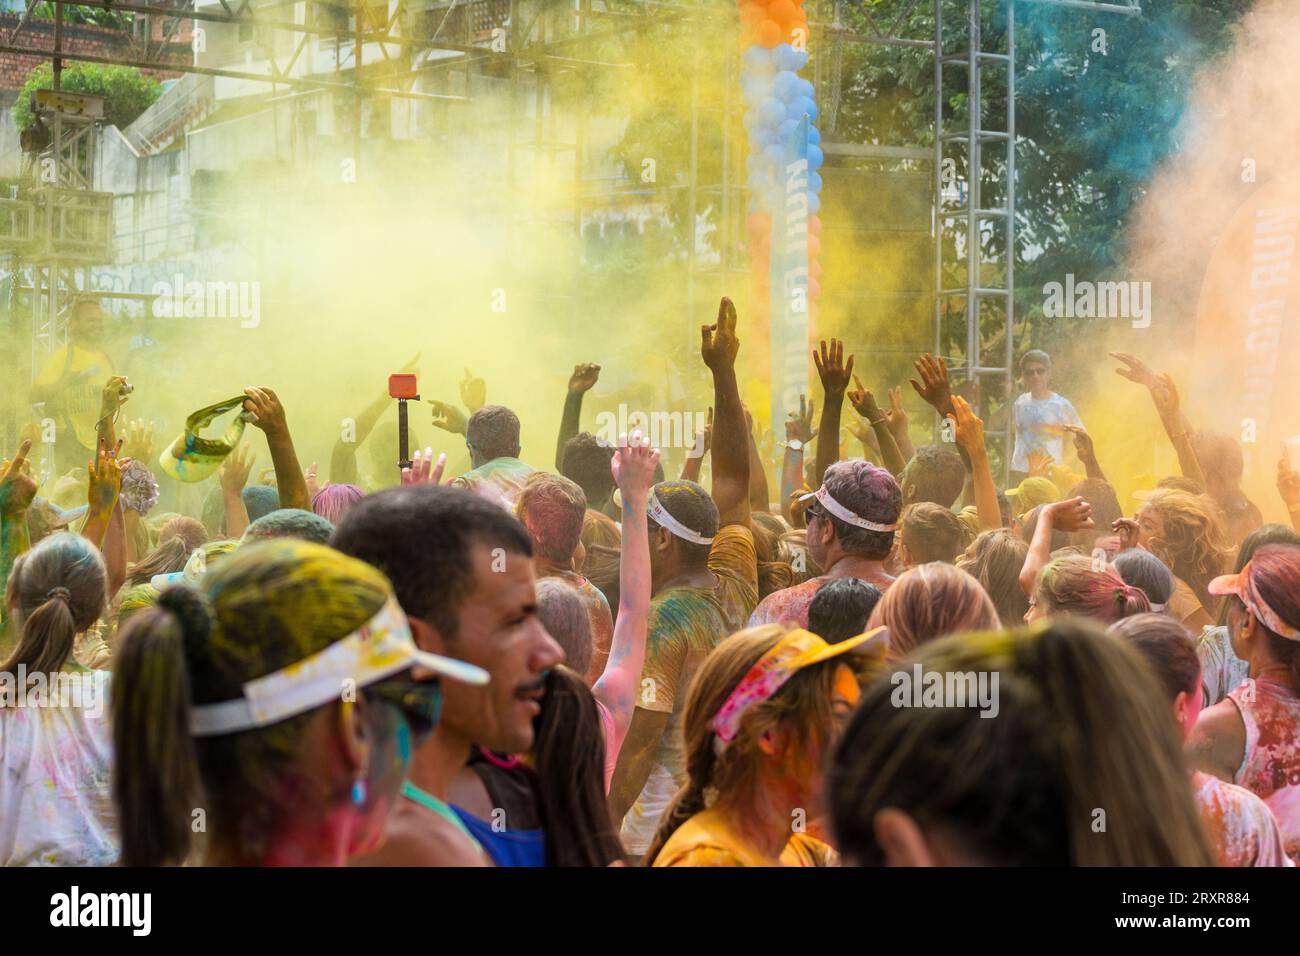 Salvador, Bahia, Brazil - March 22, 2015: Crowds of people are seen with their arms raised during the color run at Dique do Tororo in the city of Salv Stock Photo